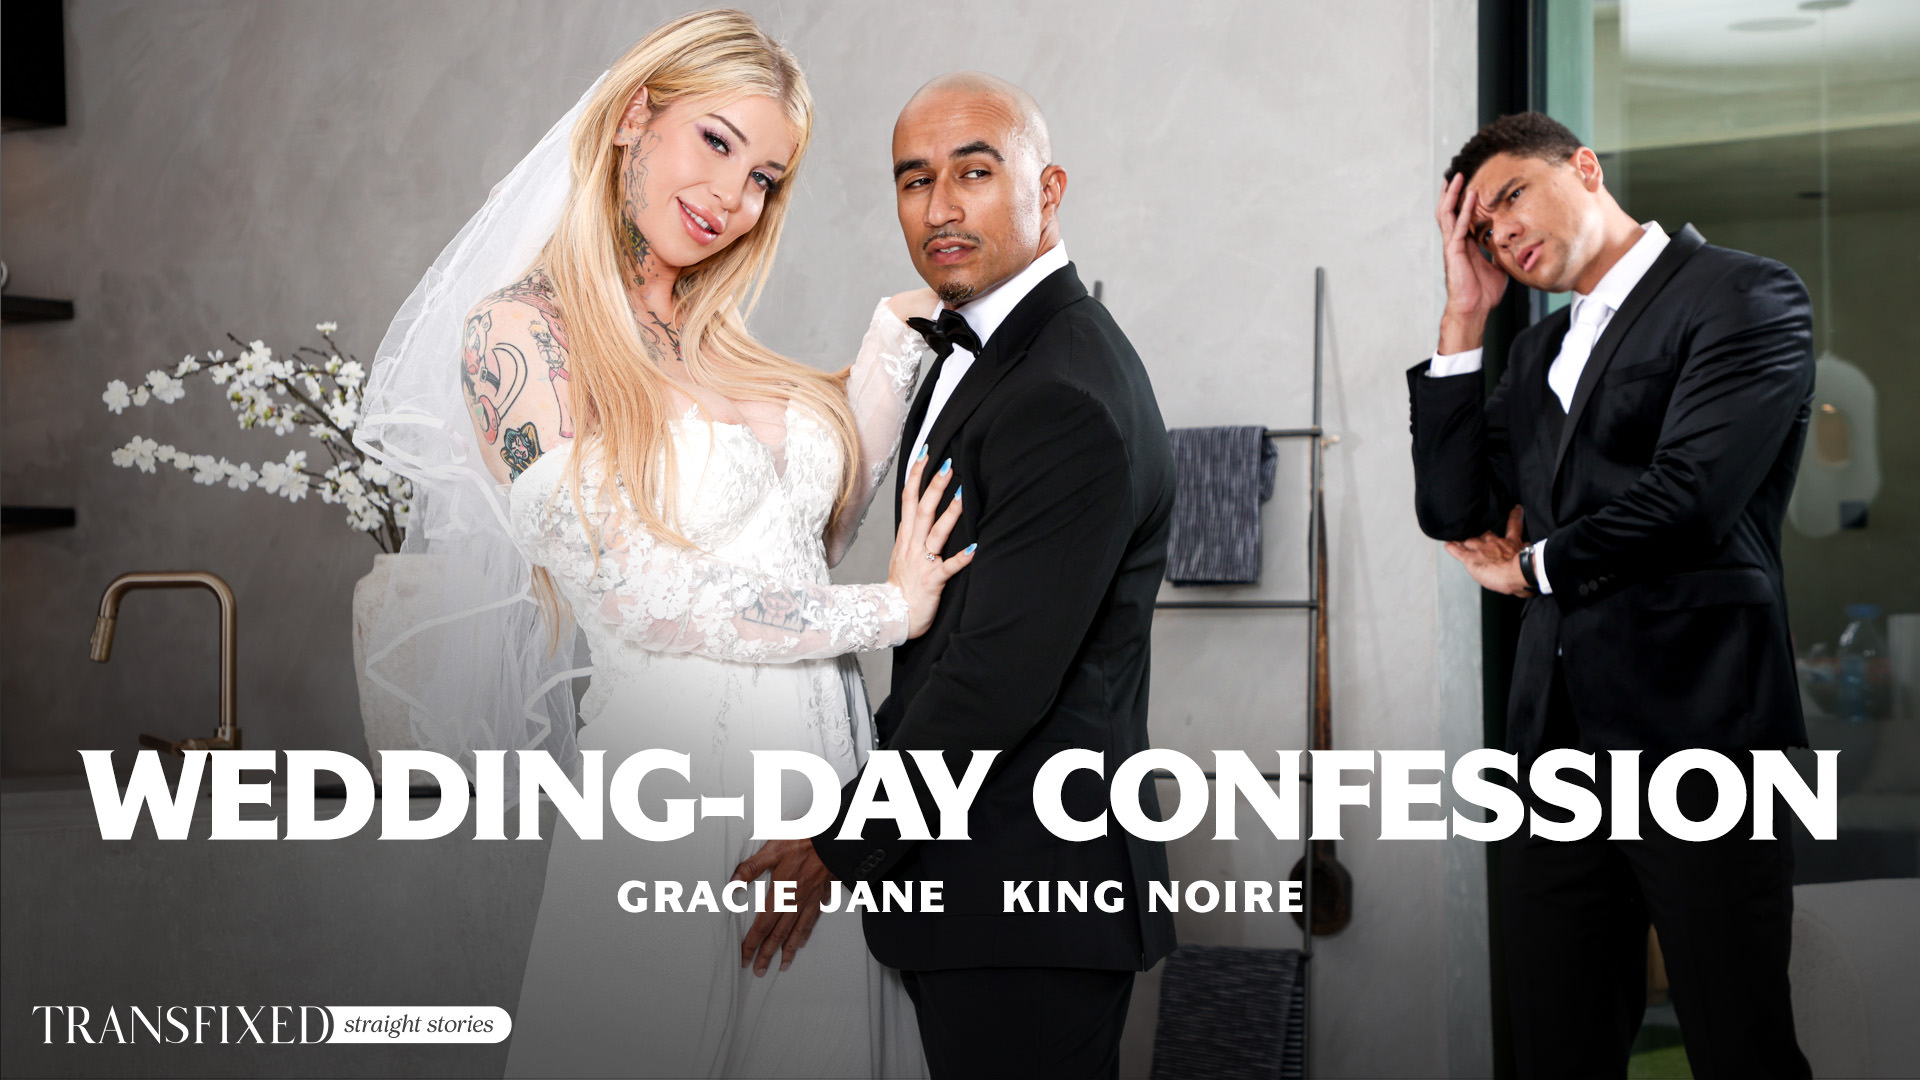 Wedding-Day Confession, Scene #01 in Transfixed series with Gracie Jane, King Noire by Adult Time